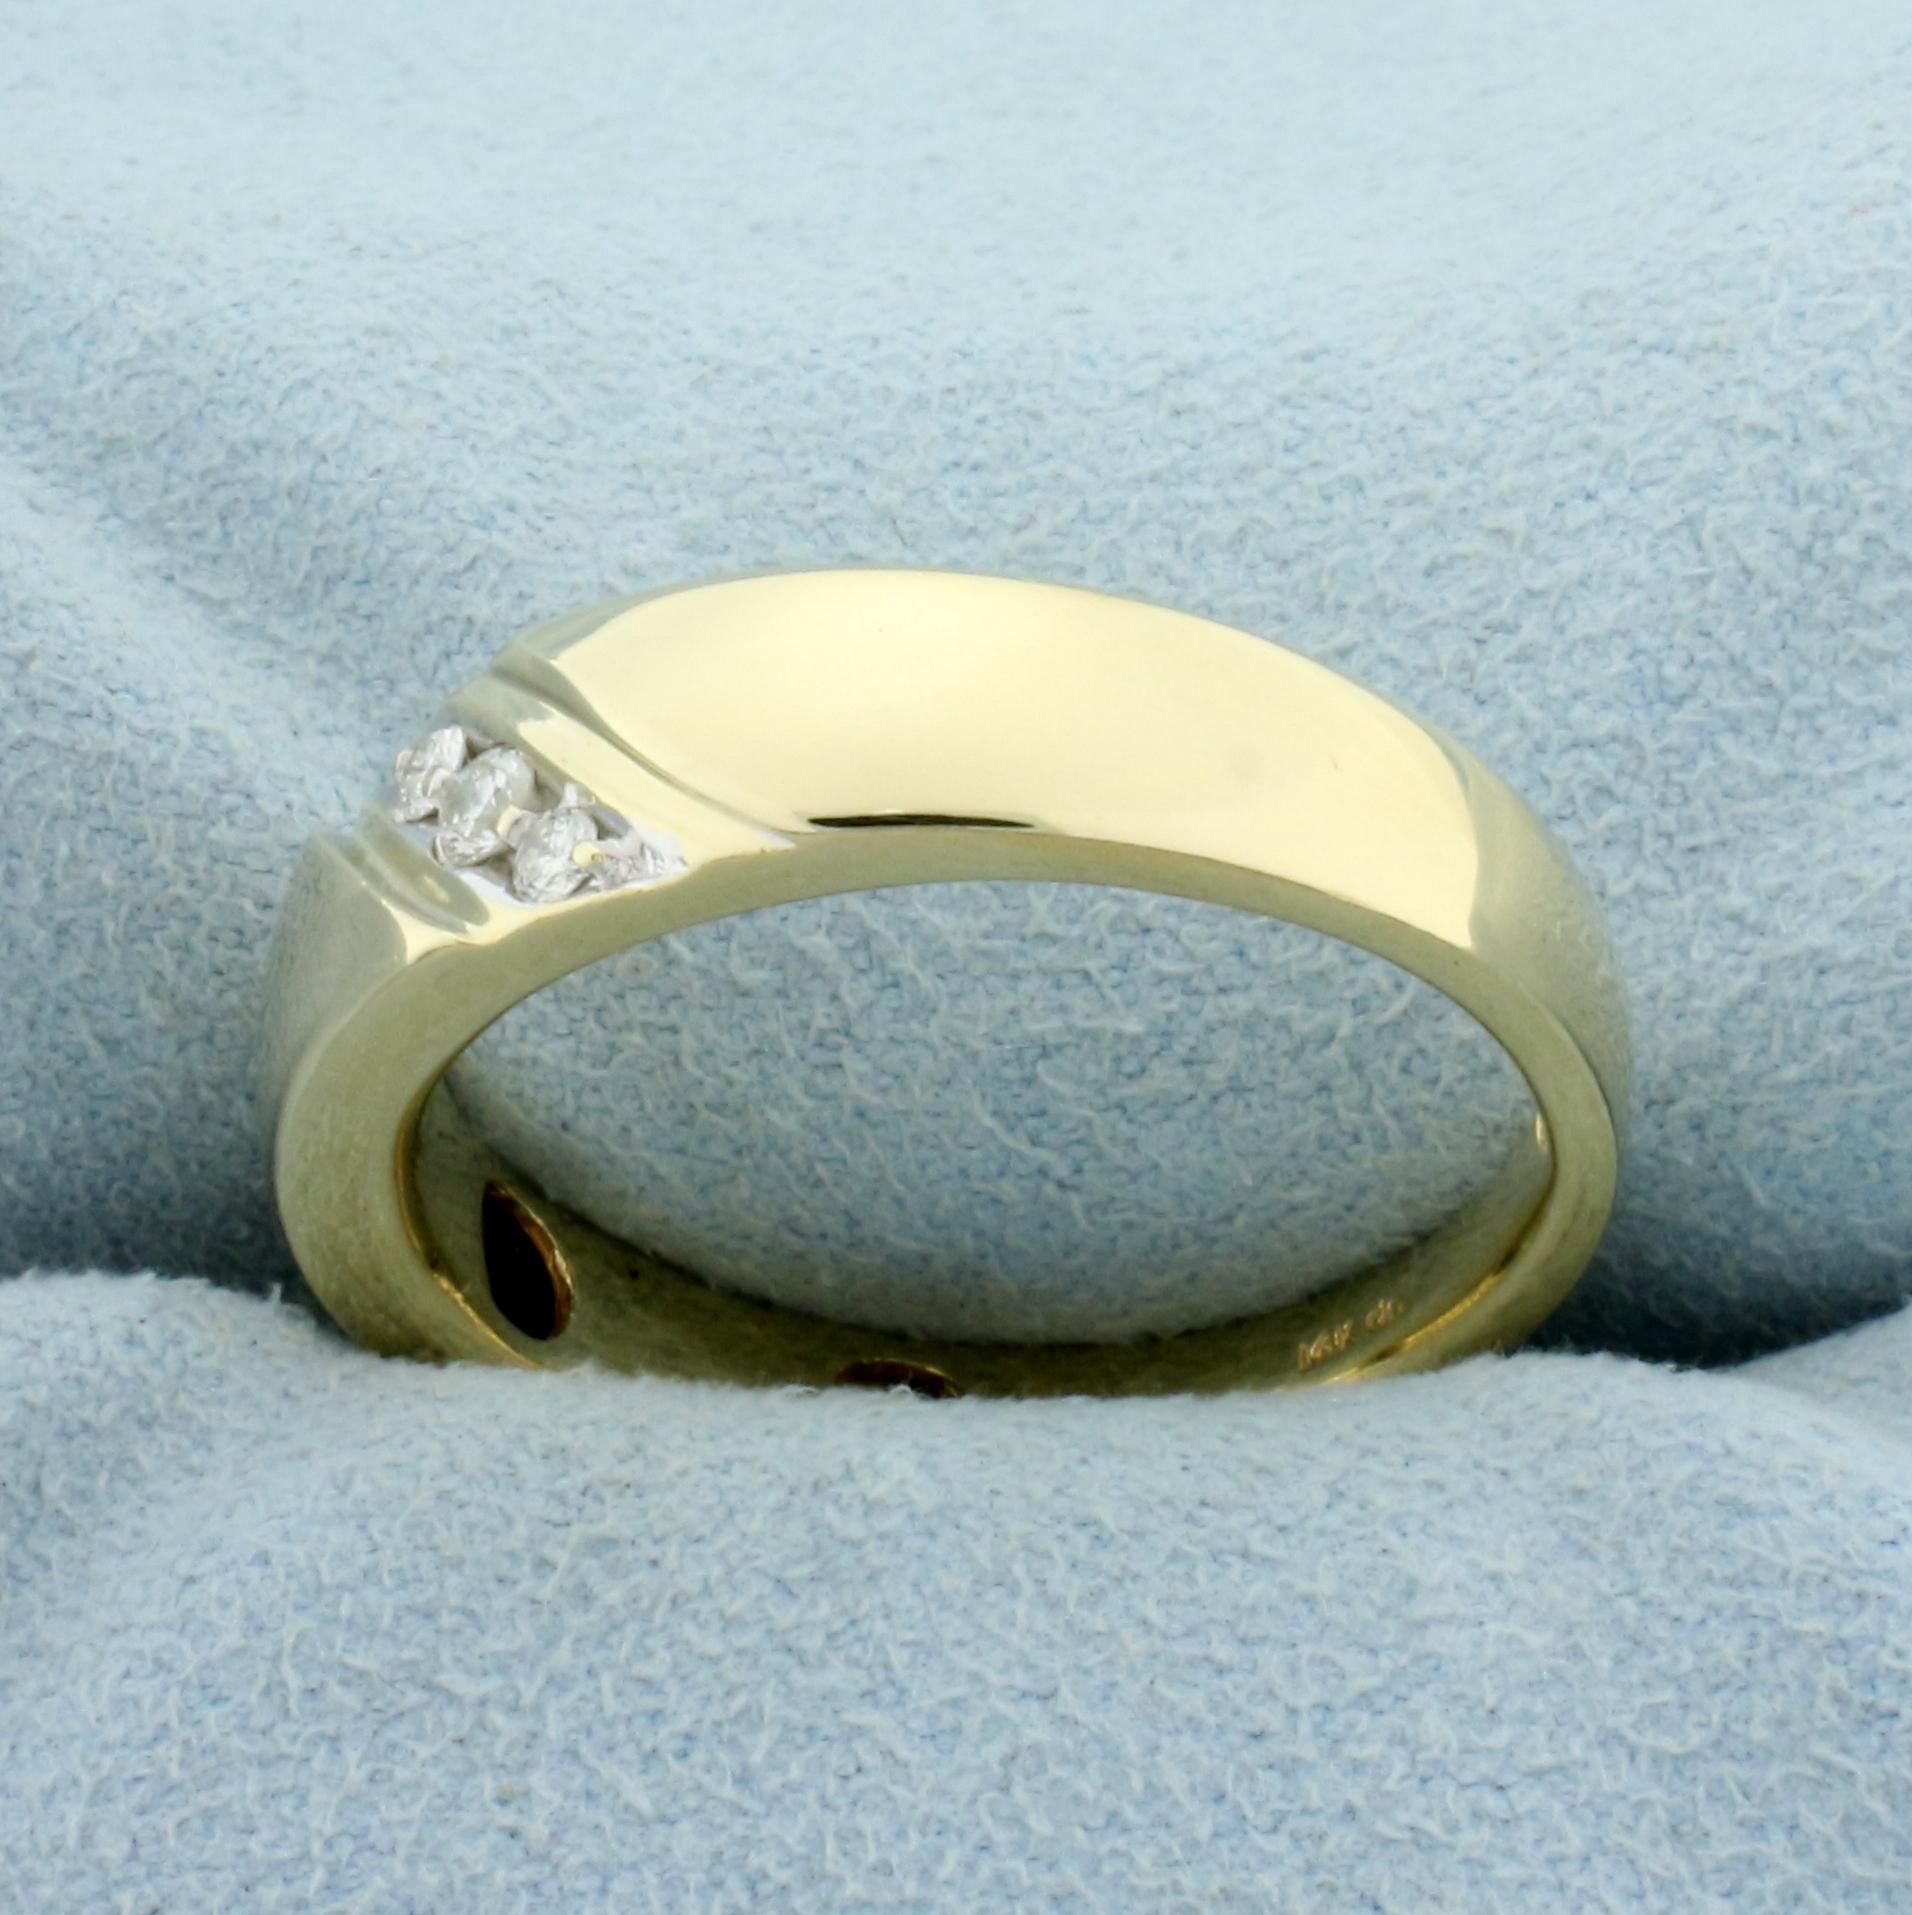 Men's Diamond Wedding Or Anniversary Band Ring In 14k Yellow And White Gold